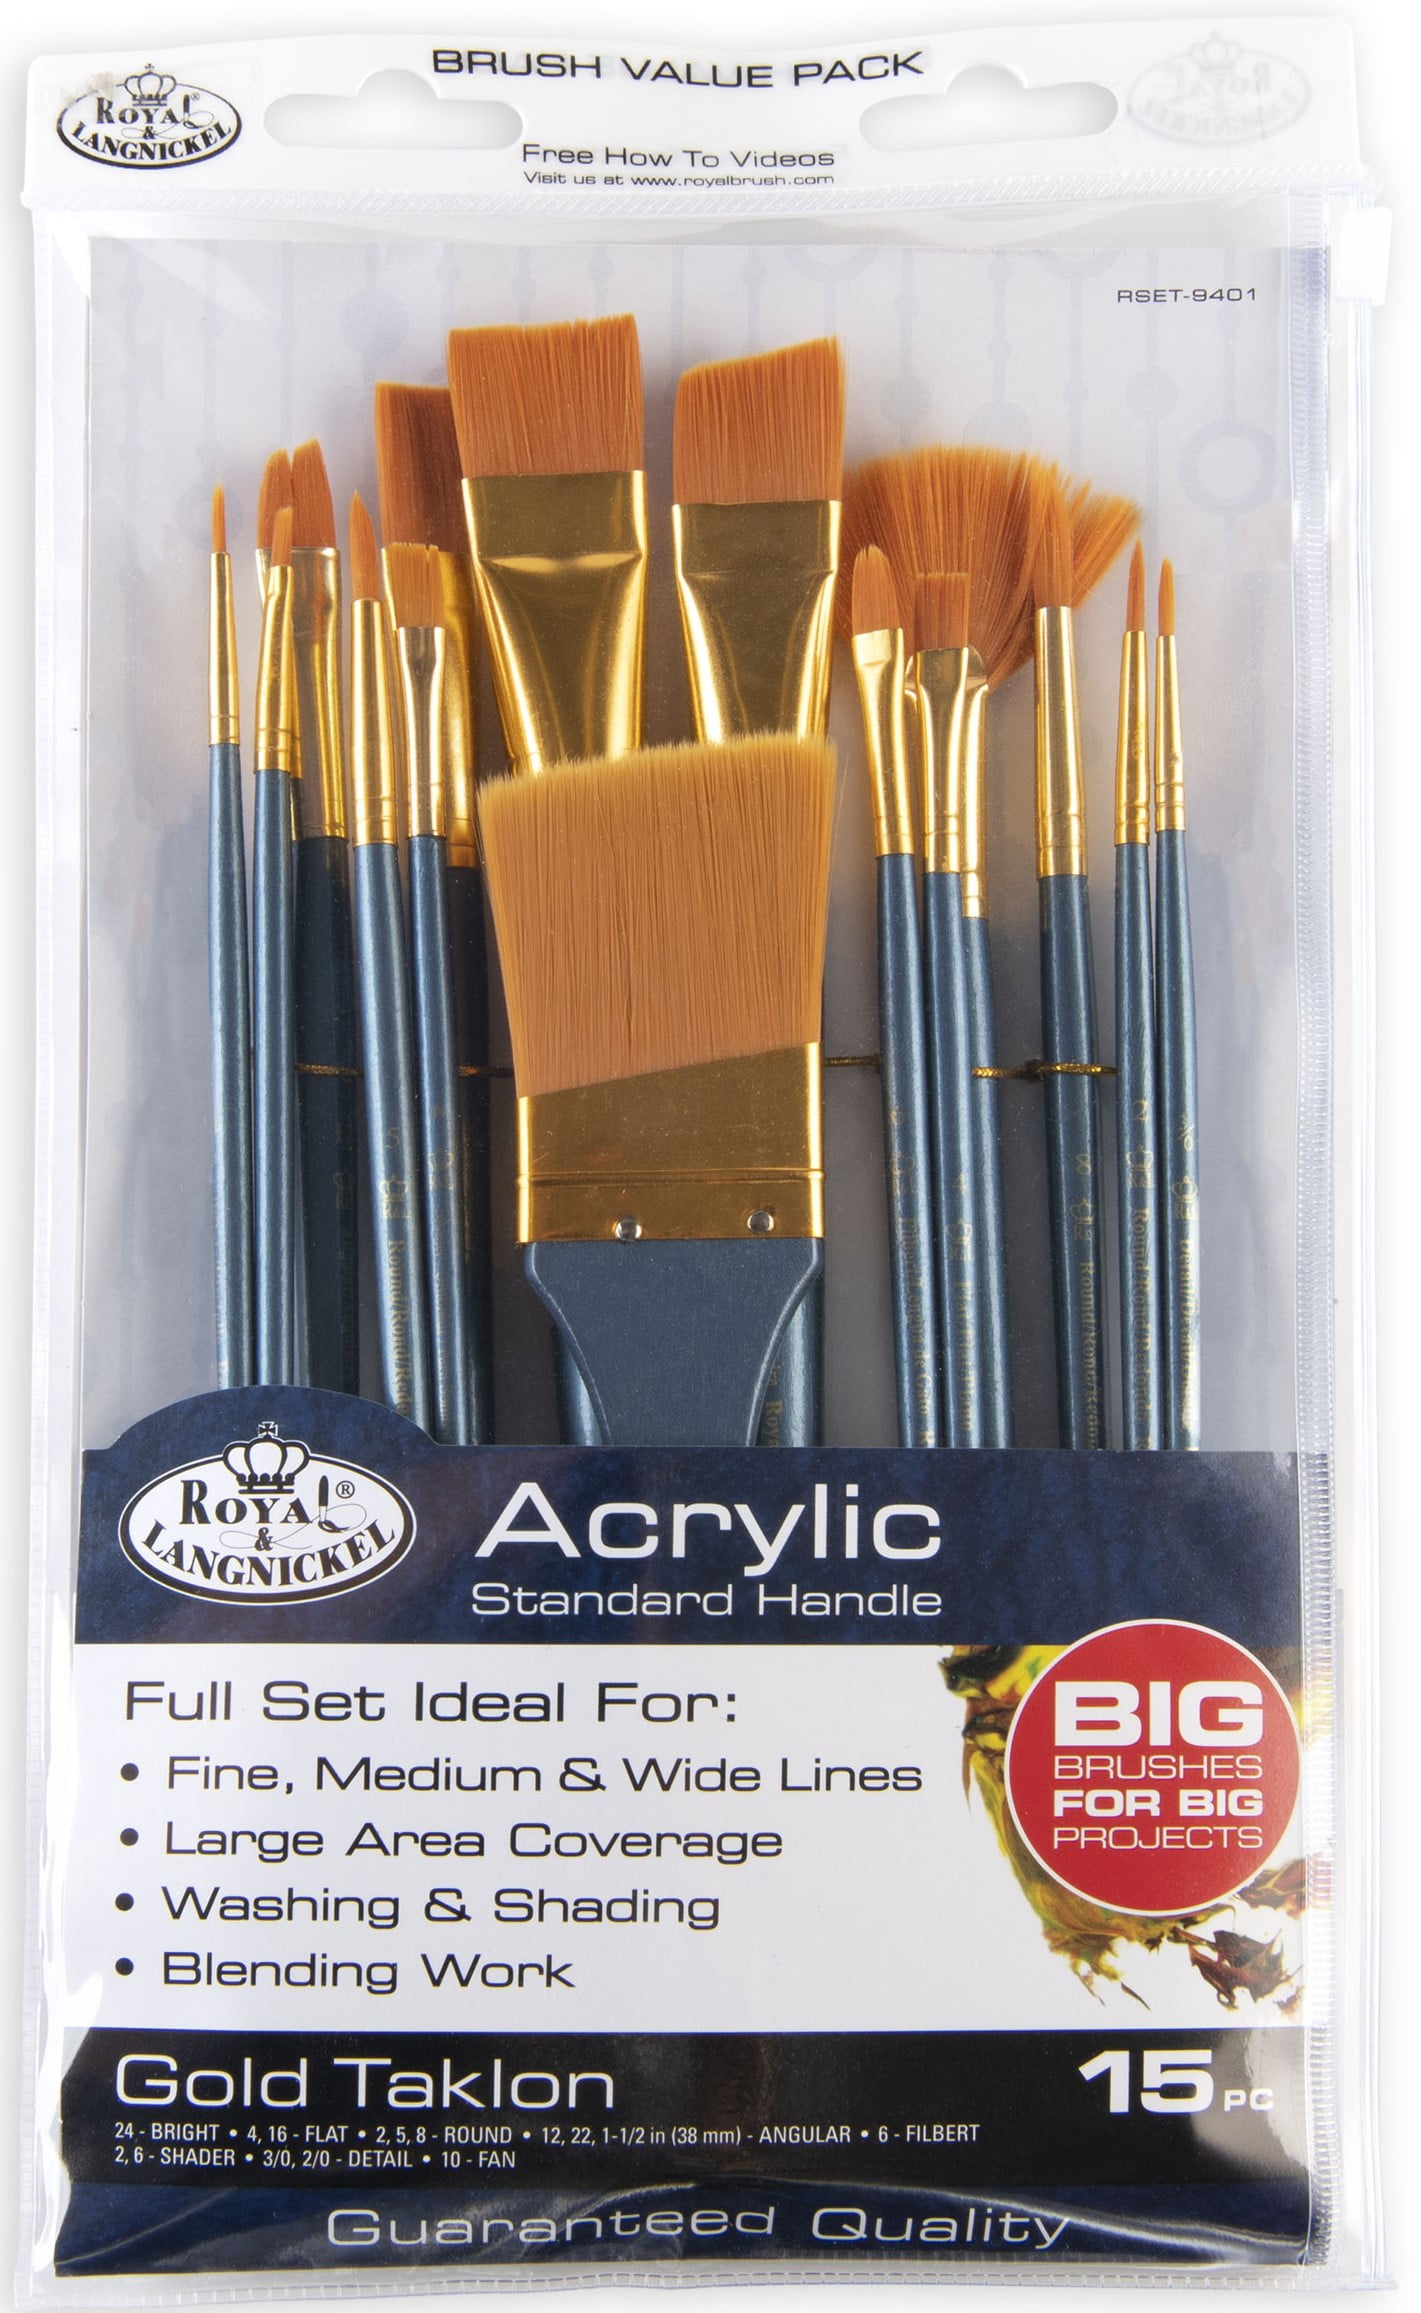 Sax True Flow Synthetic Paint Brushes, Assorted Sizes, Set of 72